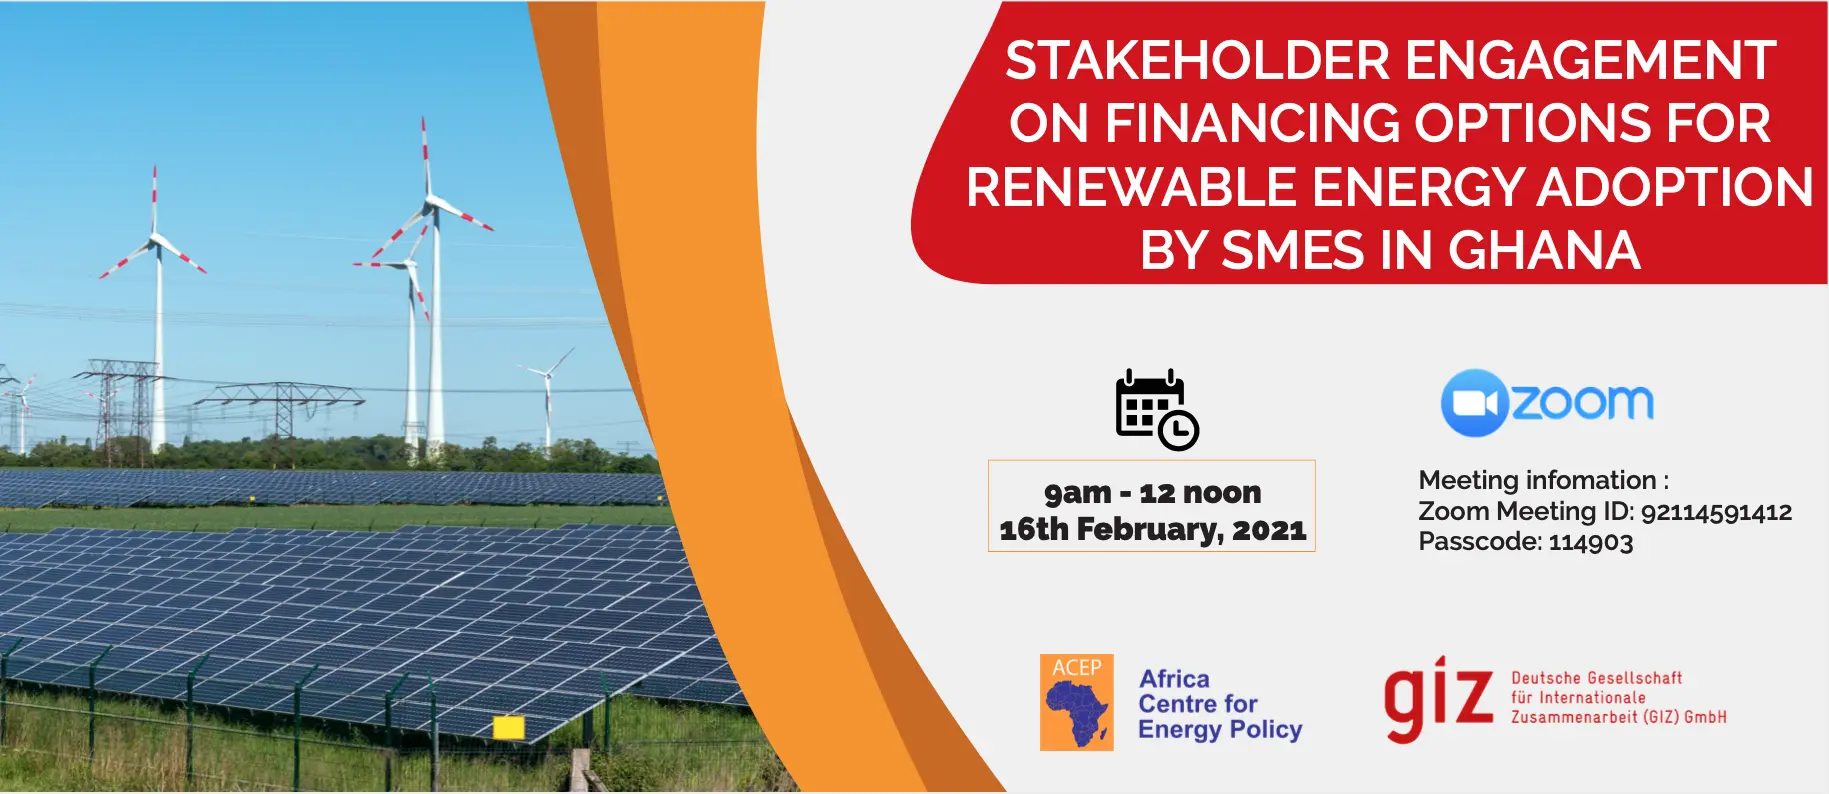 Stakeholder Engagement On Financing Options For Renewable Energy Adoption By SMEs In Ghana